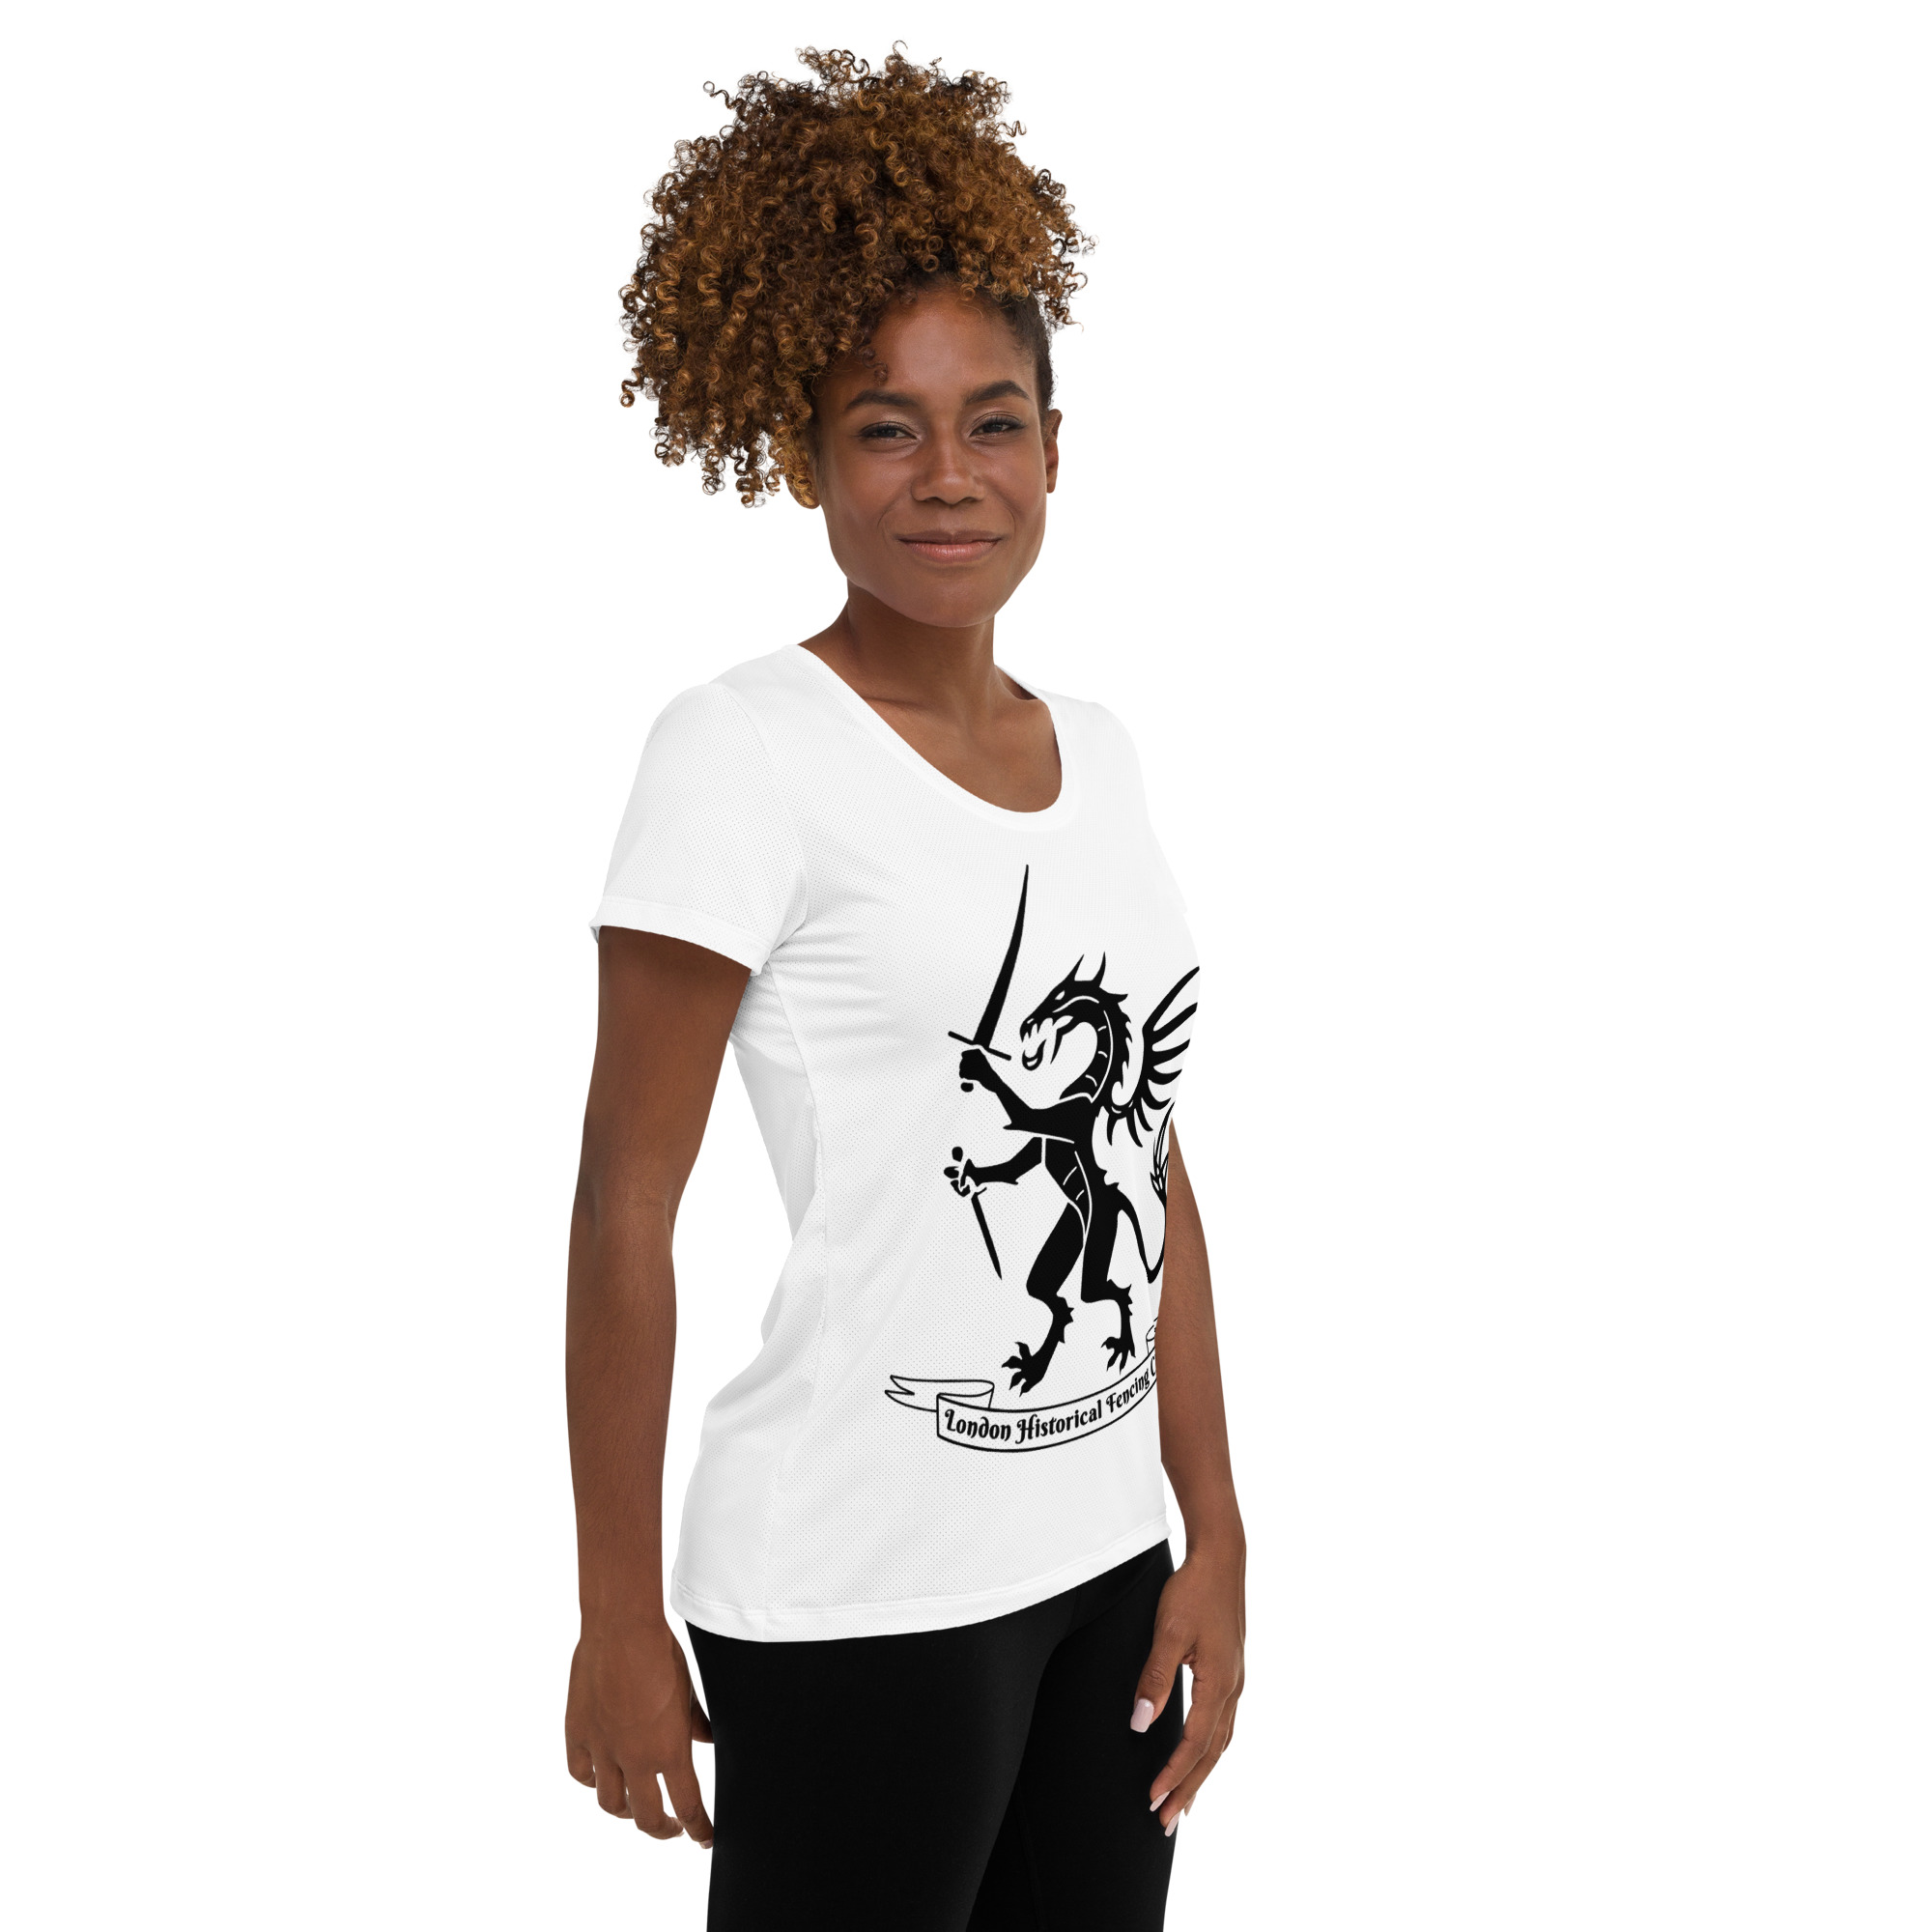 all-over-print-womens-athletic-t-shirt-white-right-65ae49c69a499.jpg